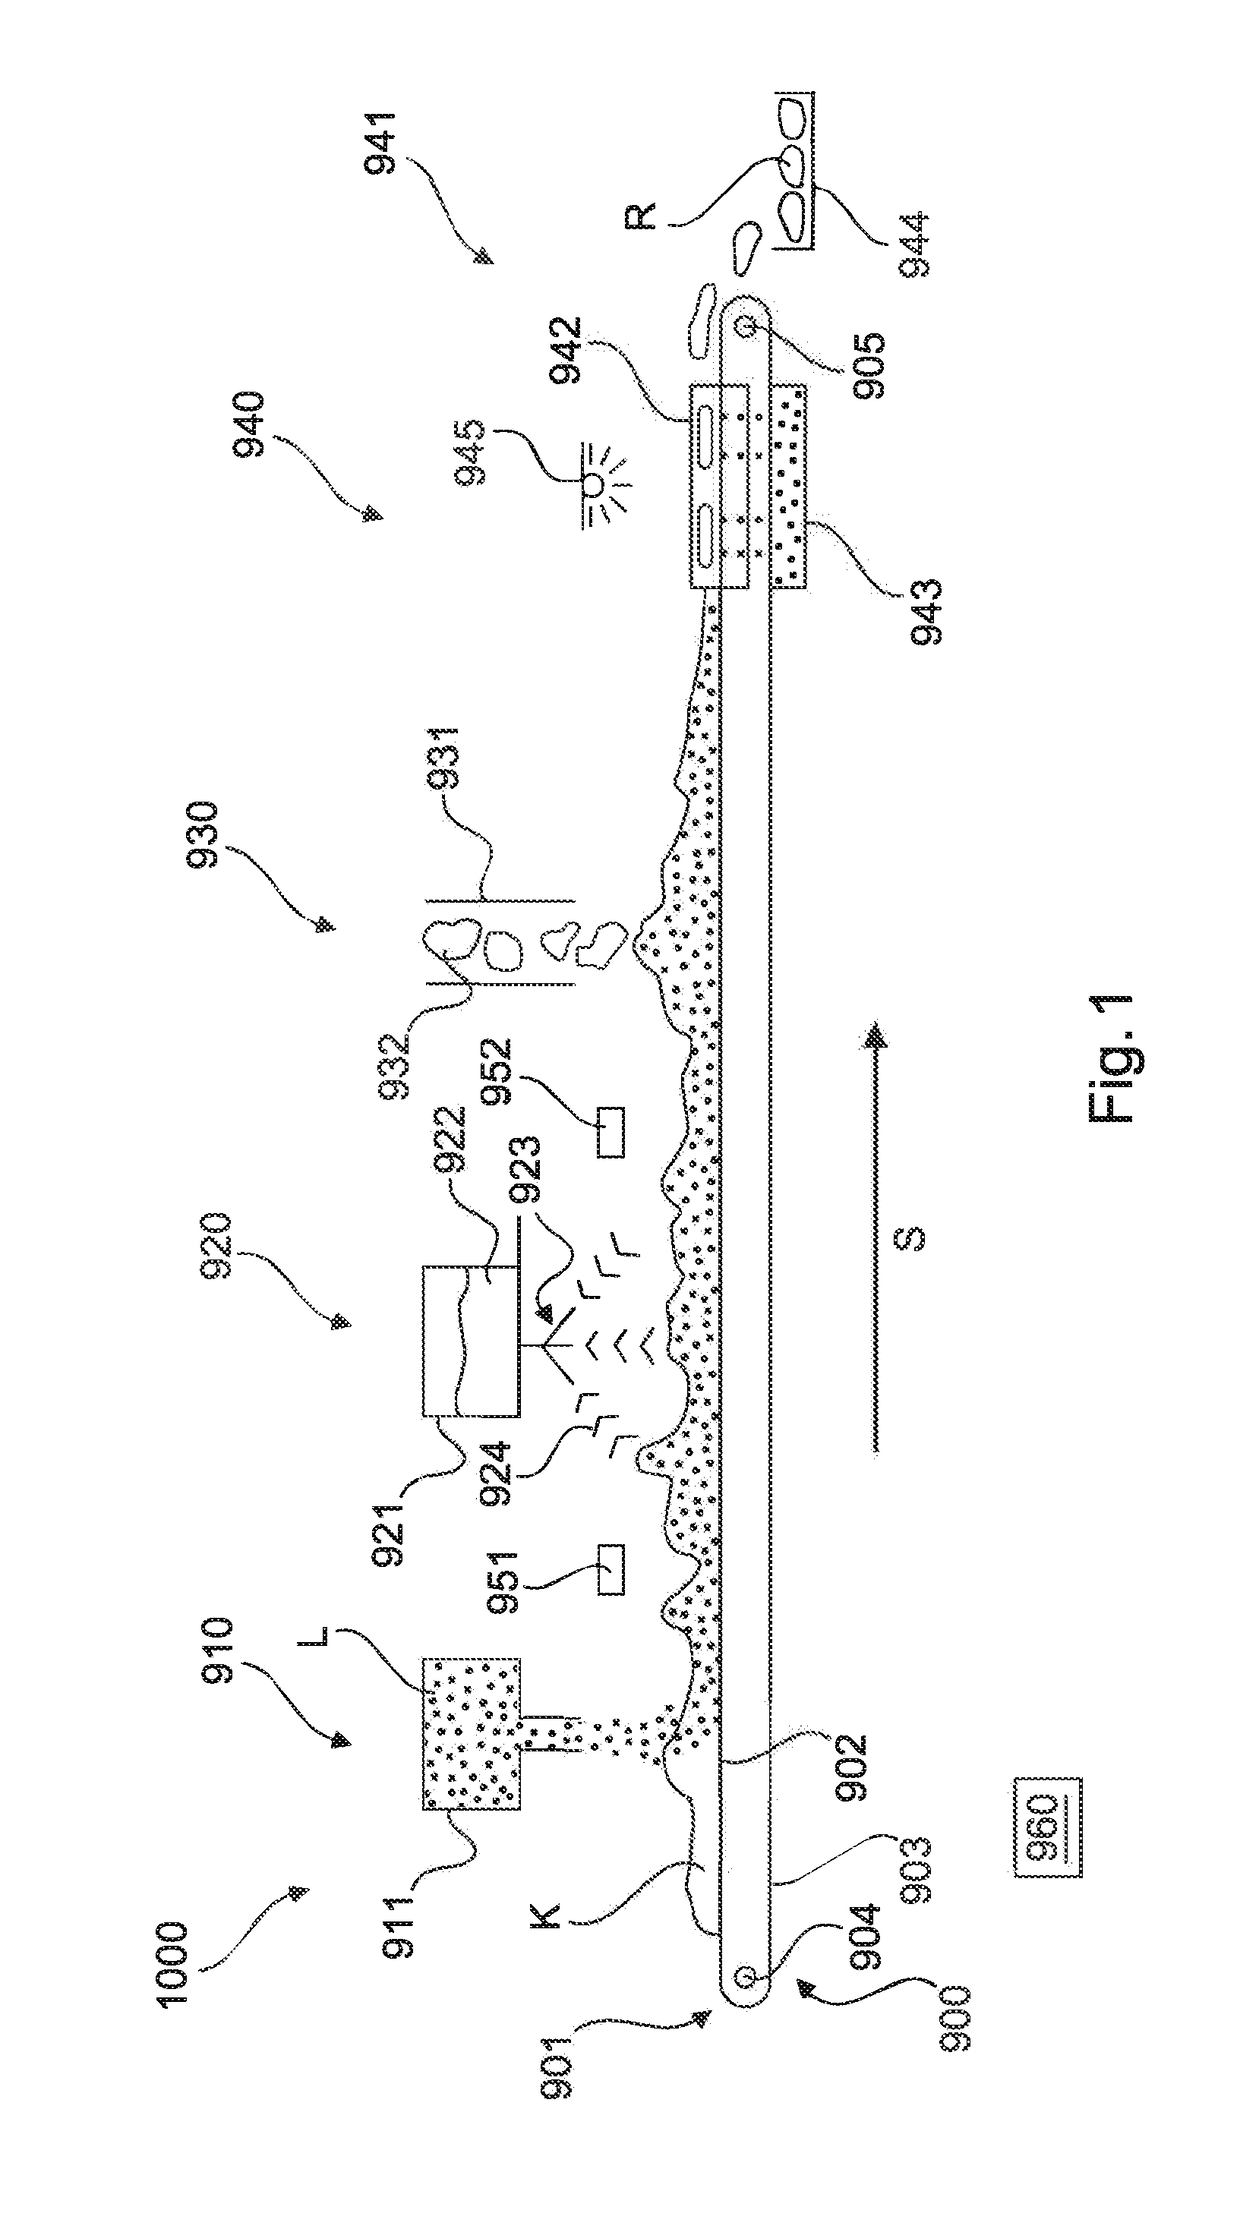 Device, system and method for residue use in livestock farming